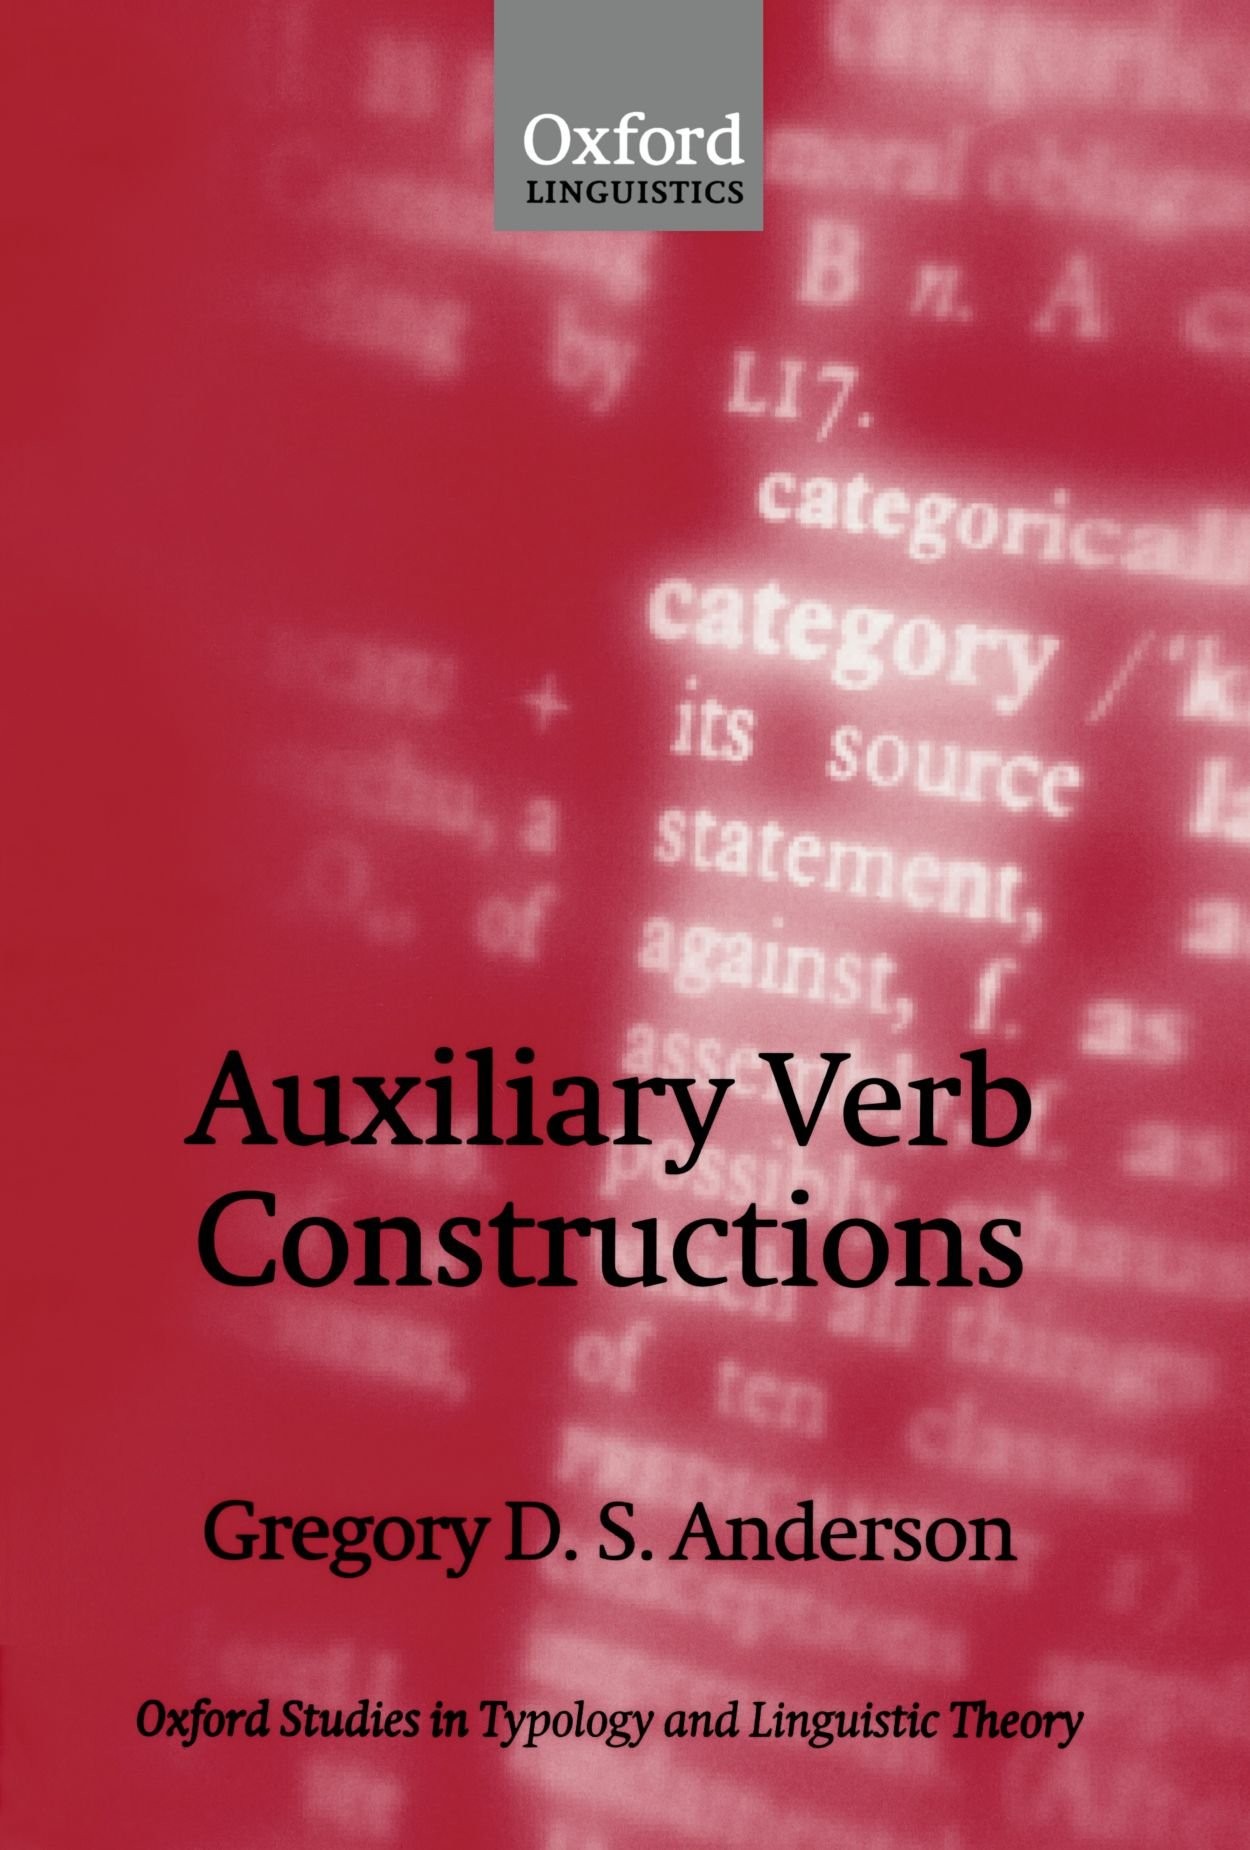 Auxiliary Verb Constructions